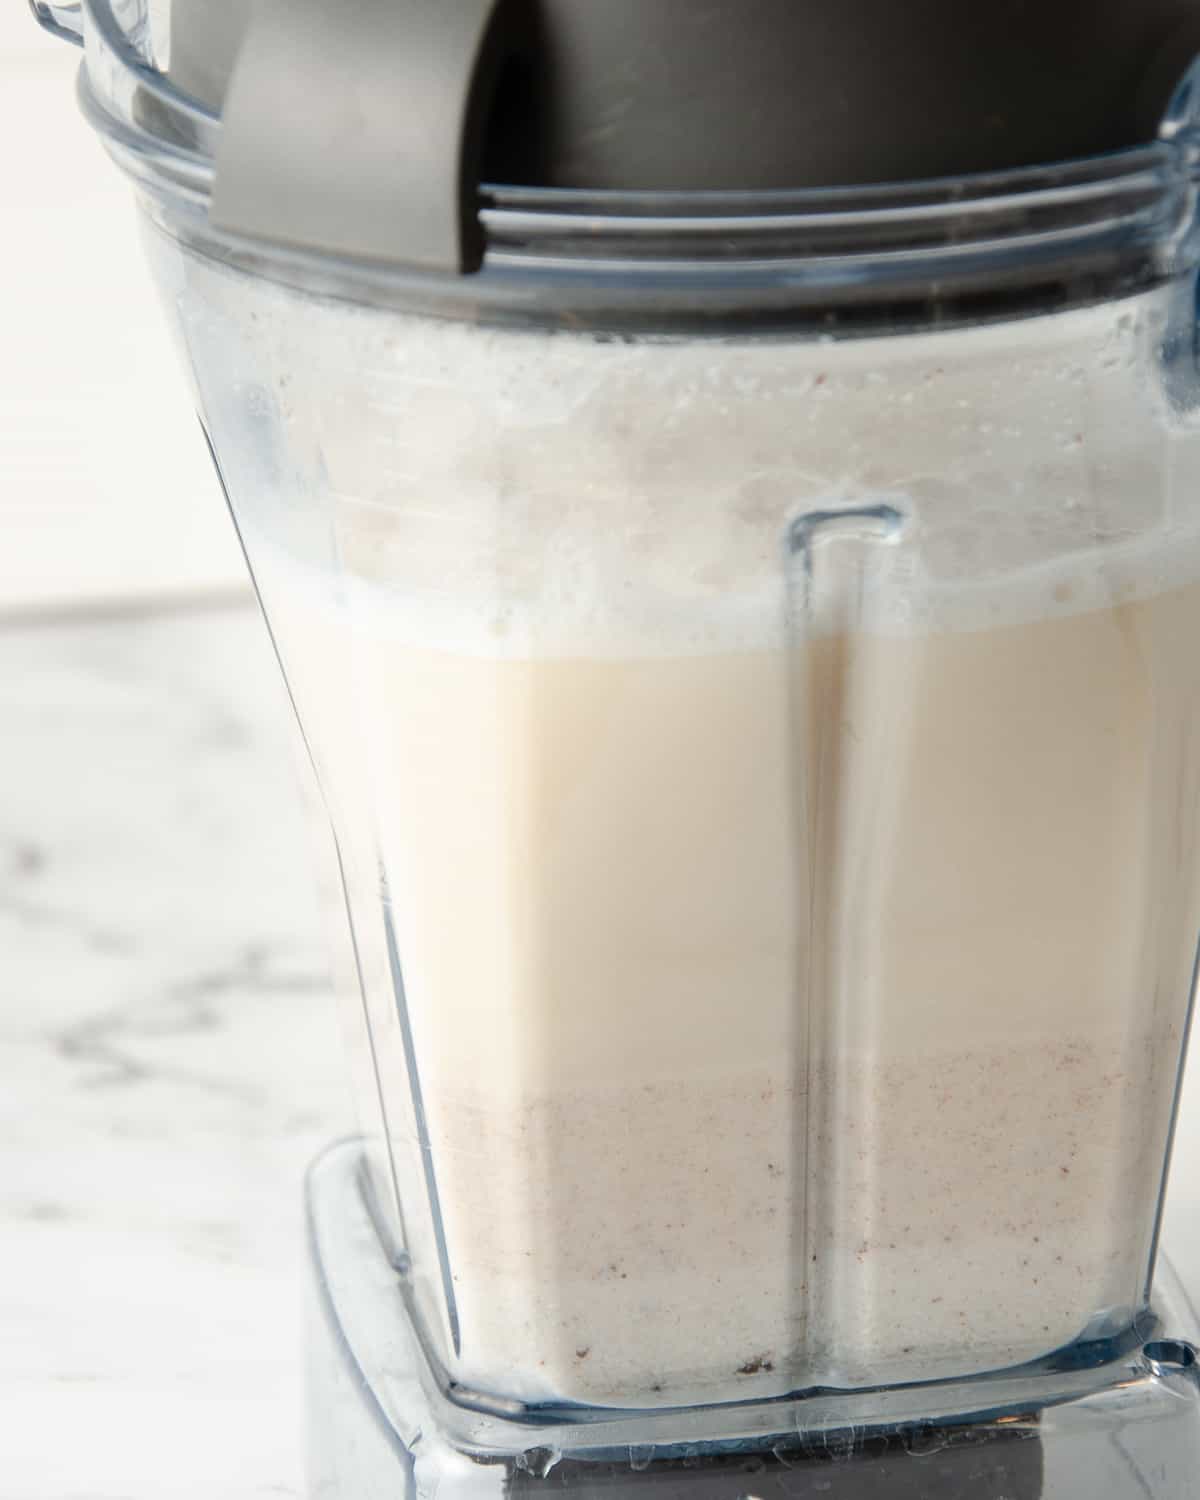 Agua de Horchata in Princess House Blender. Used 1 1/2 cup of rice and